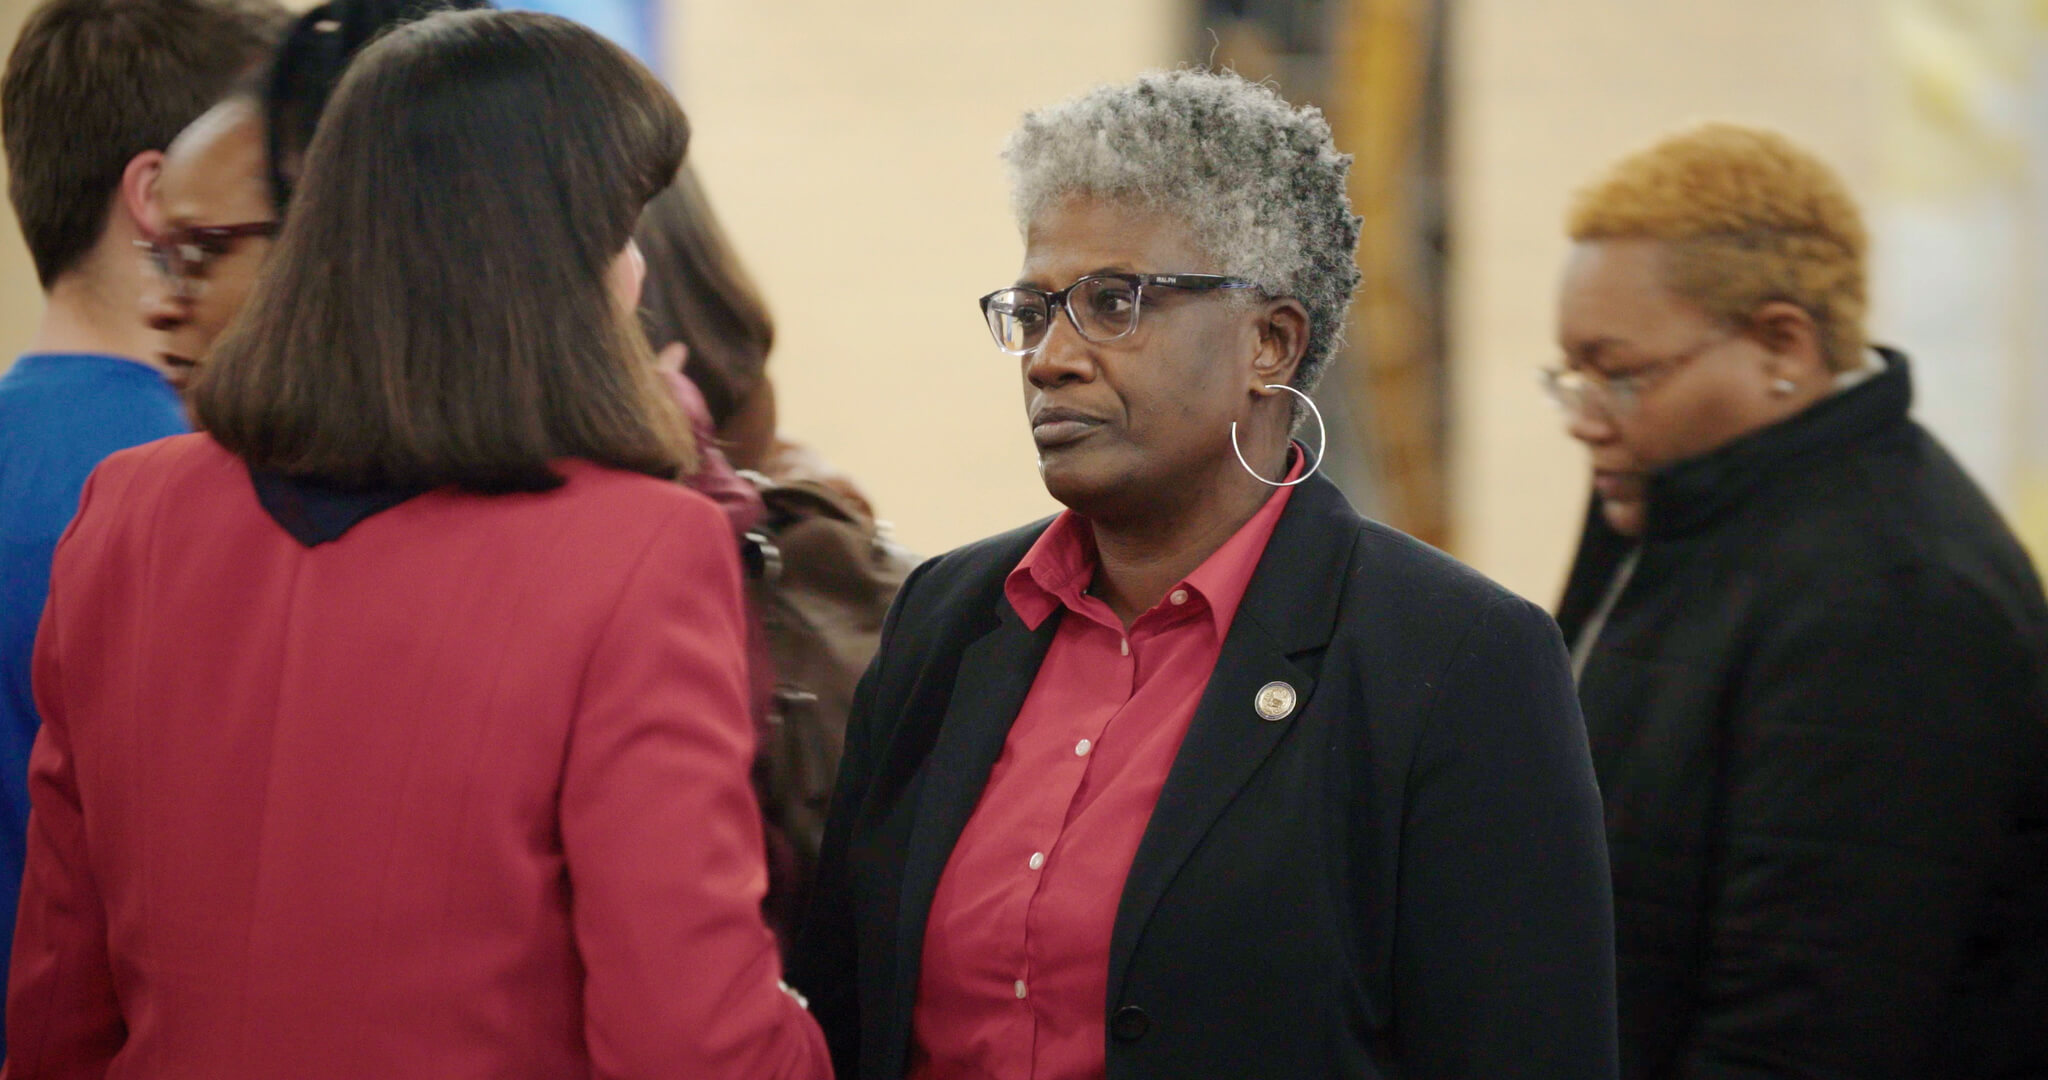 Still from I am not going to change 400 years in four. Two women talking to each other, one wears a red blazer, and the other one has short hair, a red shirt, a black blazer, and glasses.